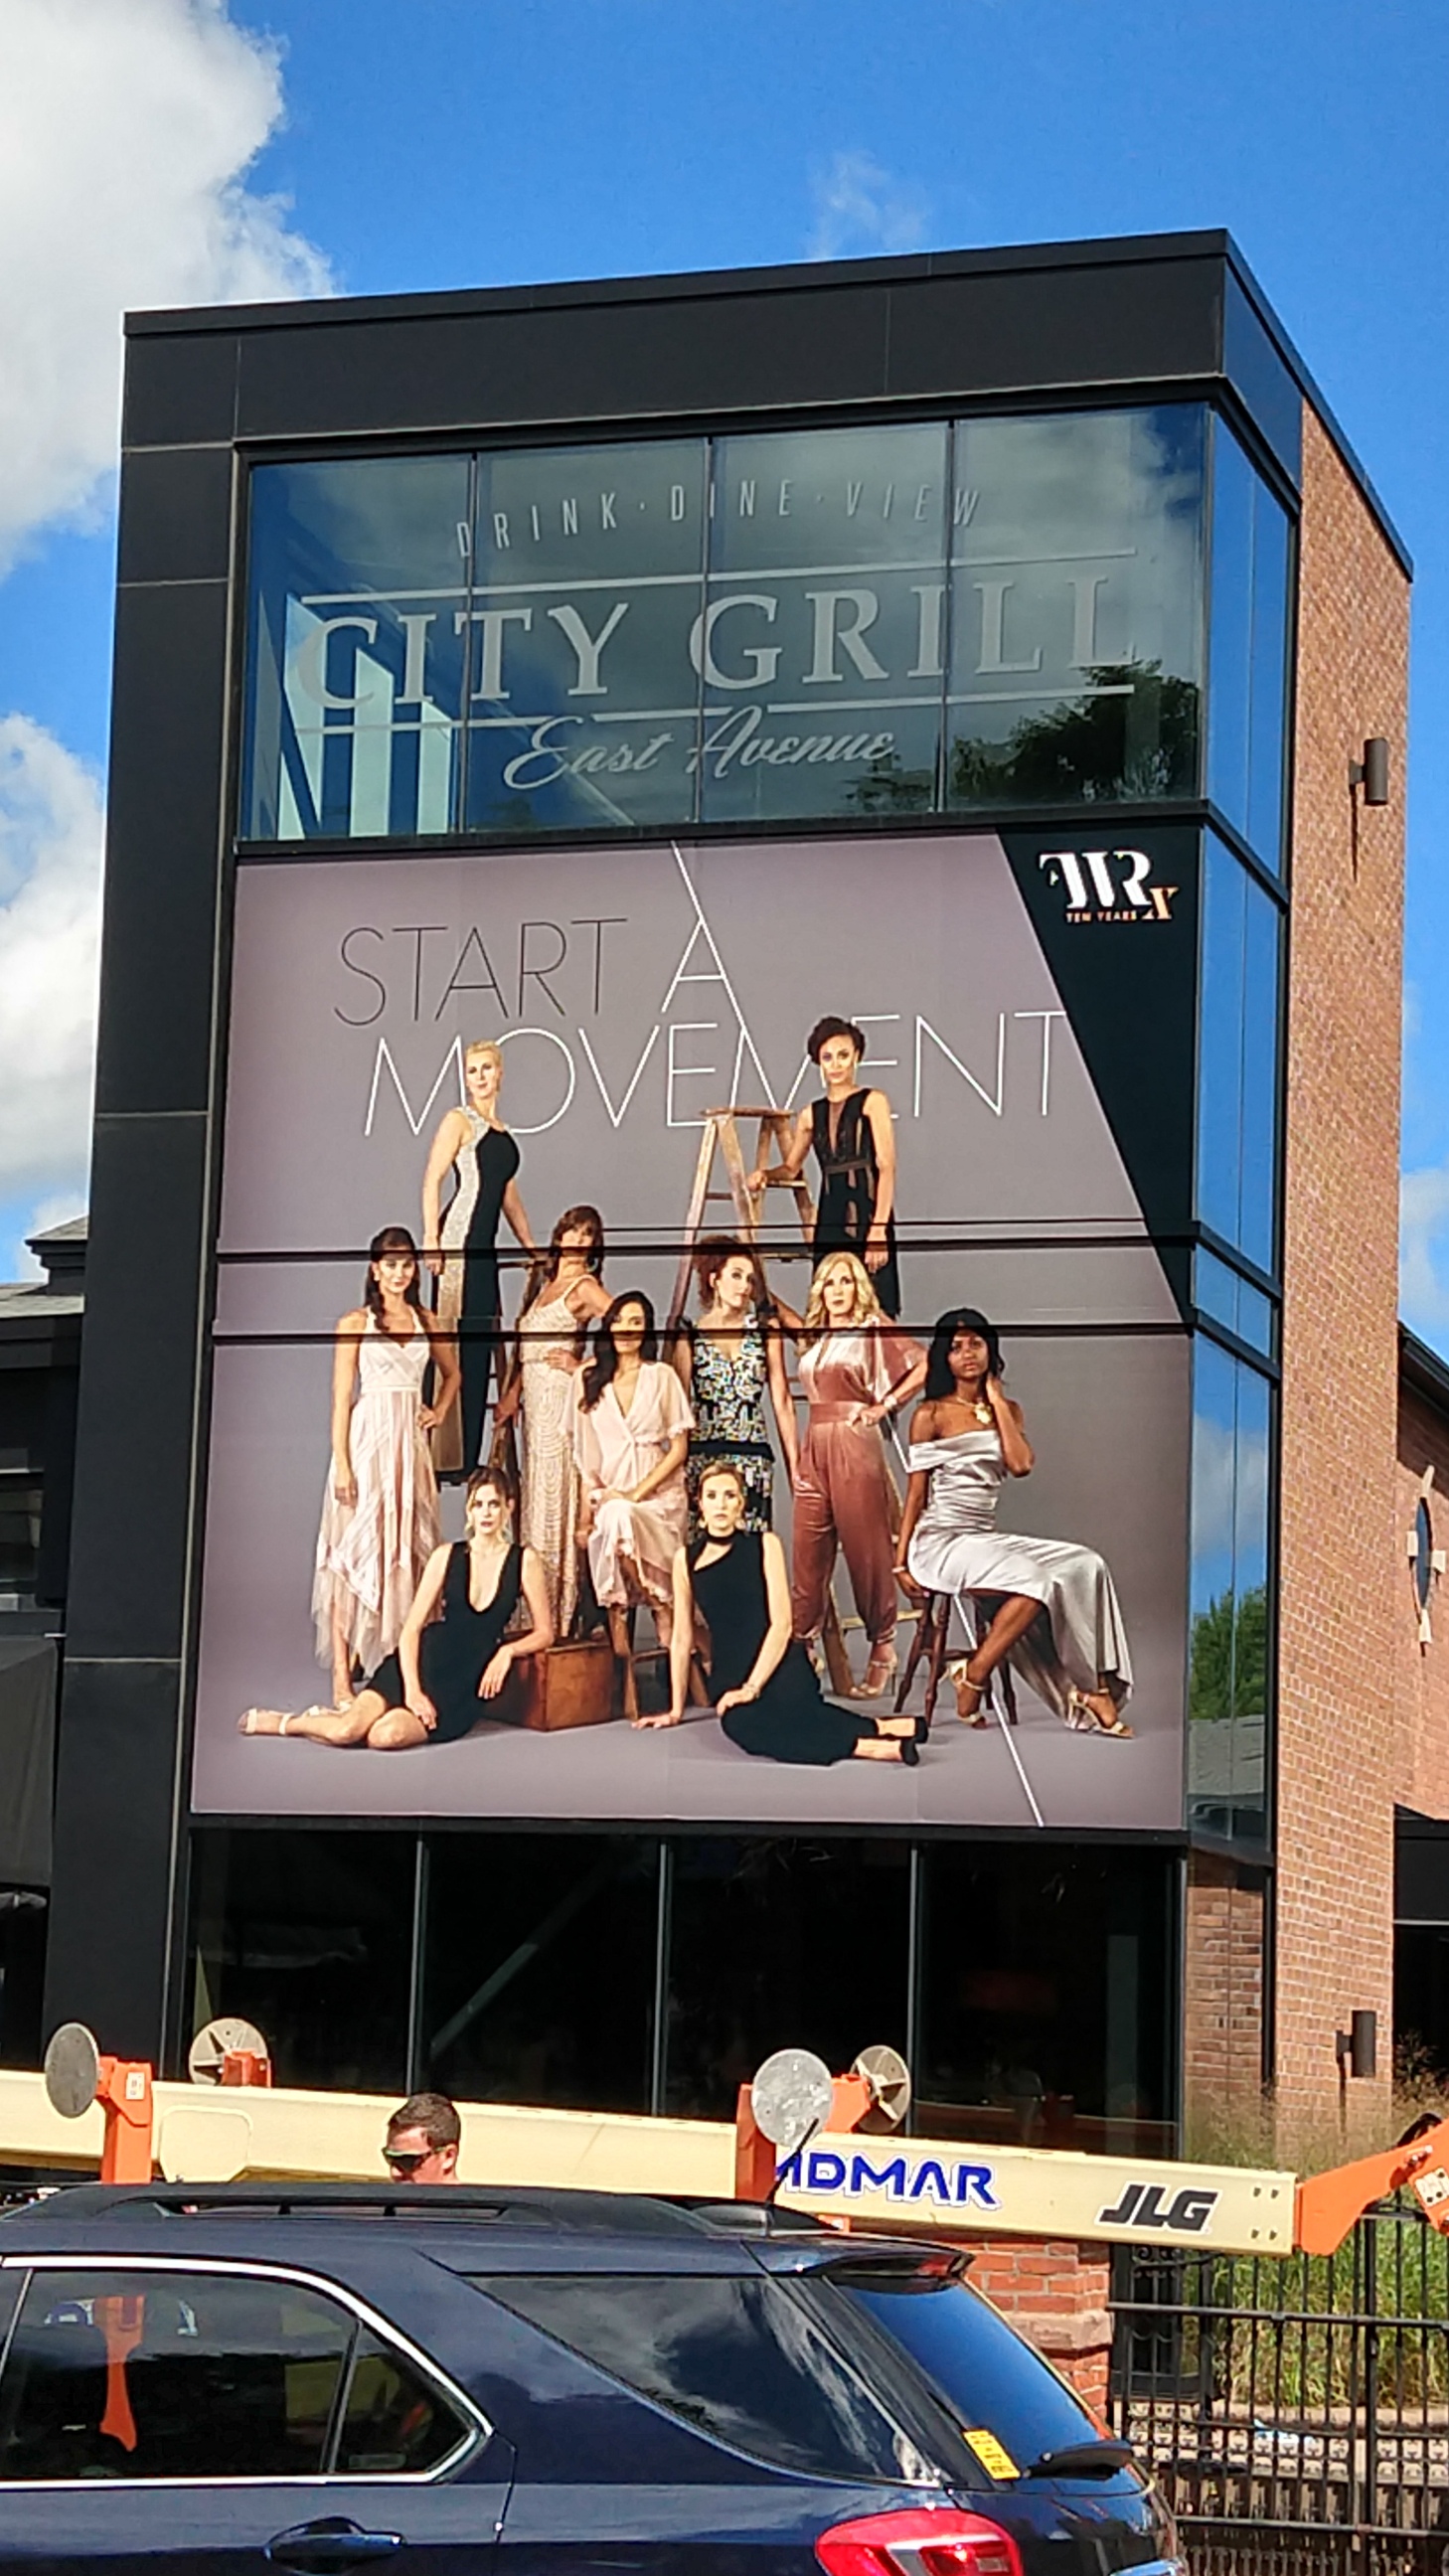 City Grill East Avenue window signage with group of women posing